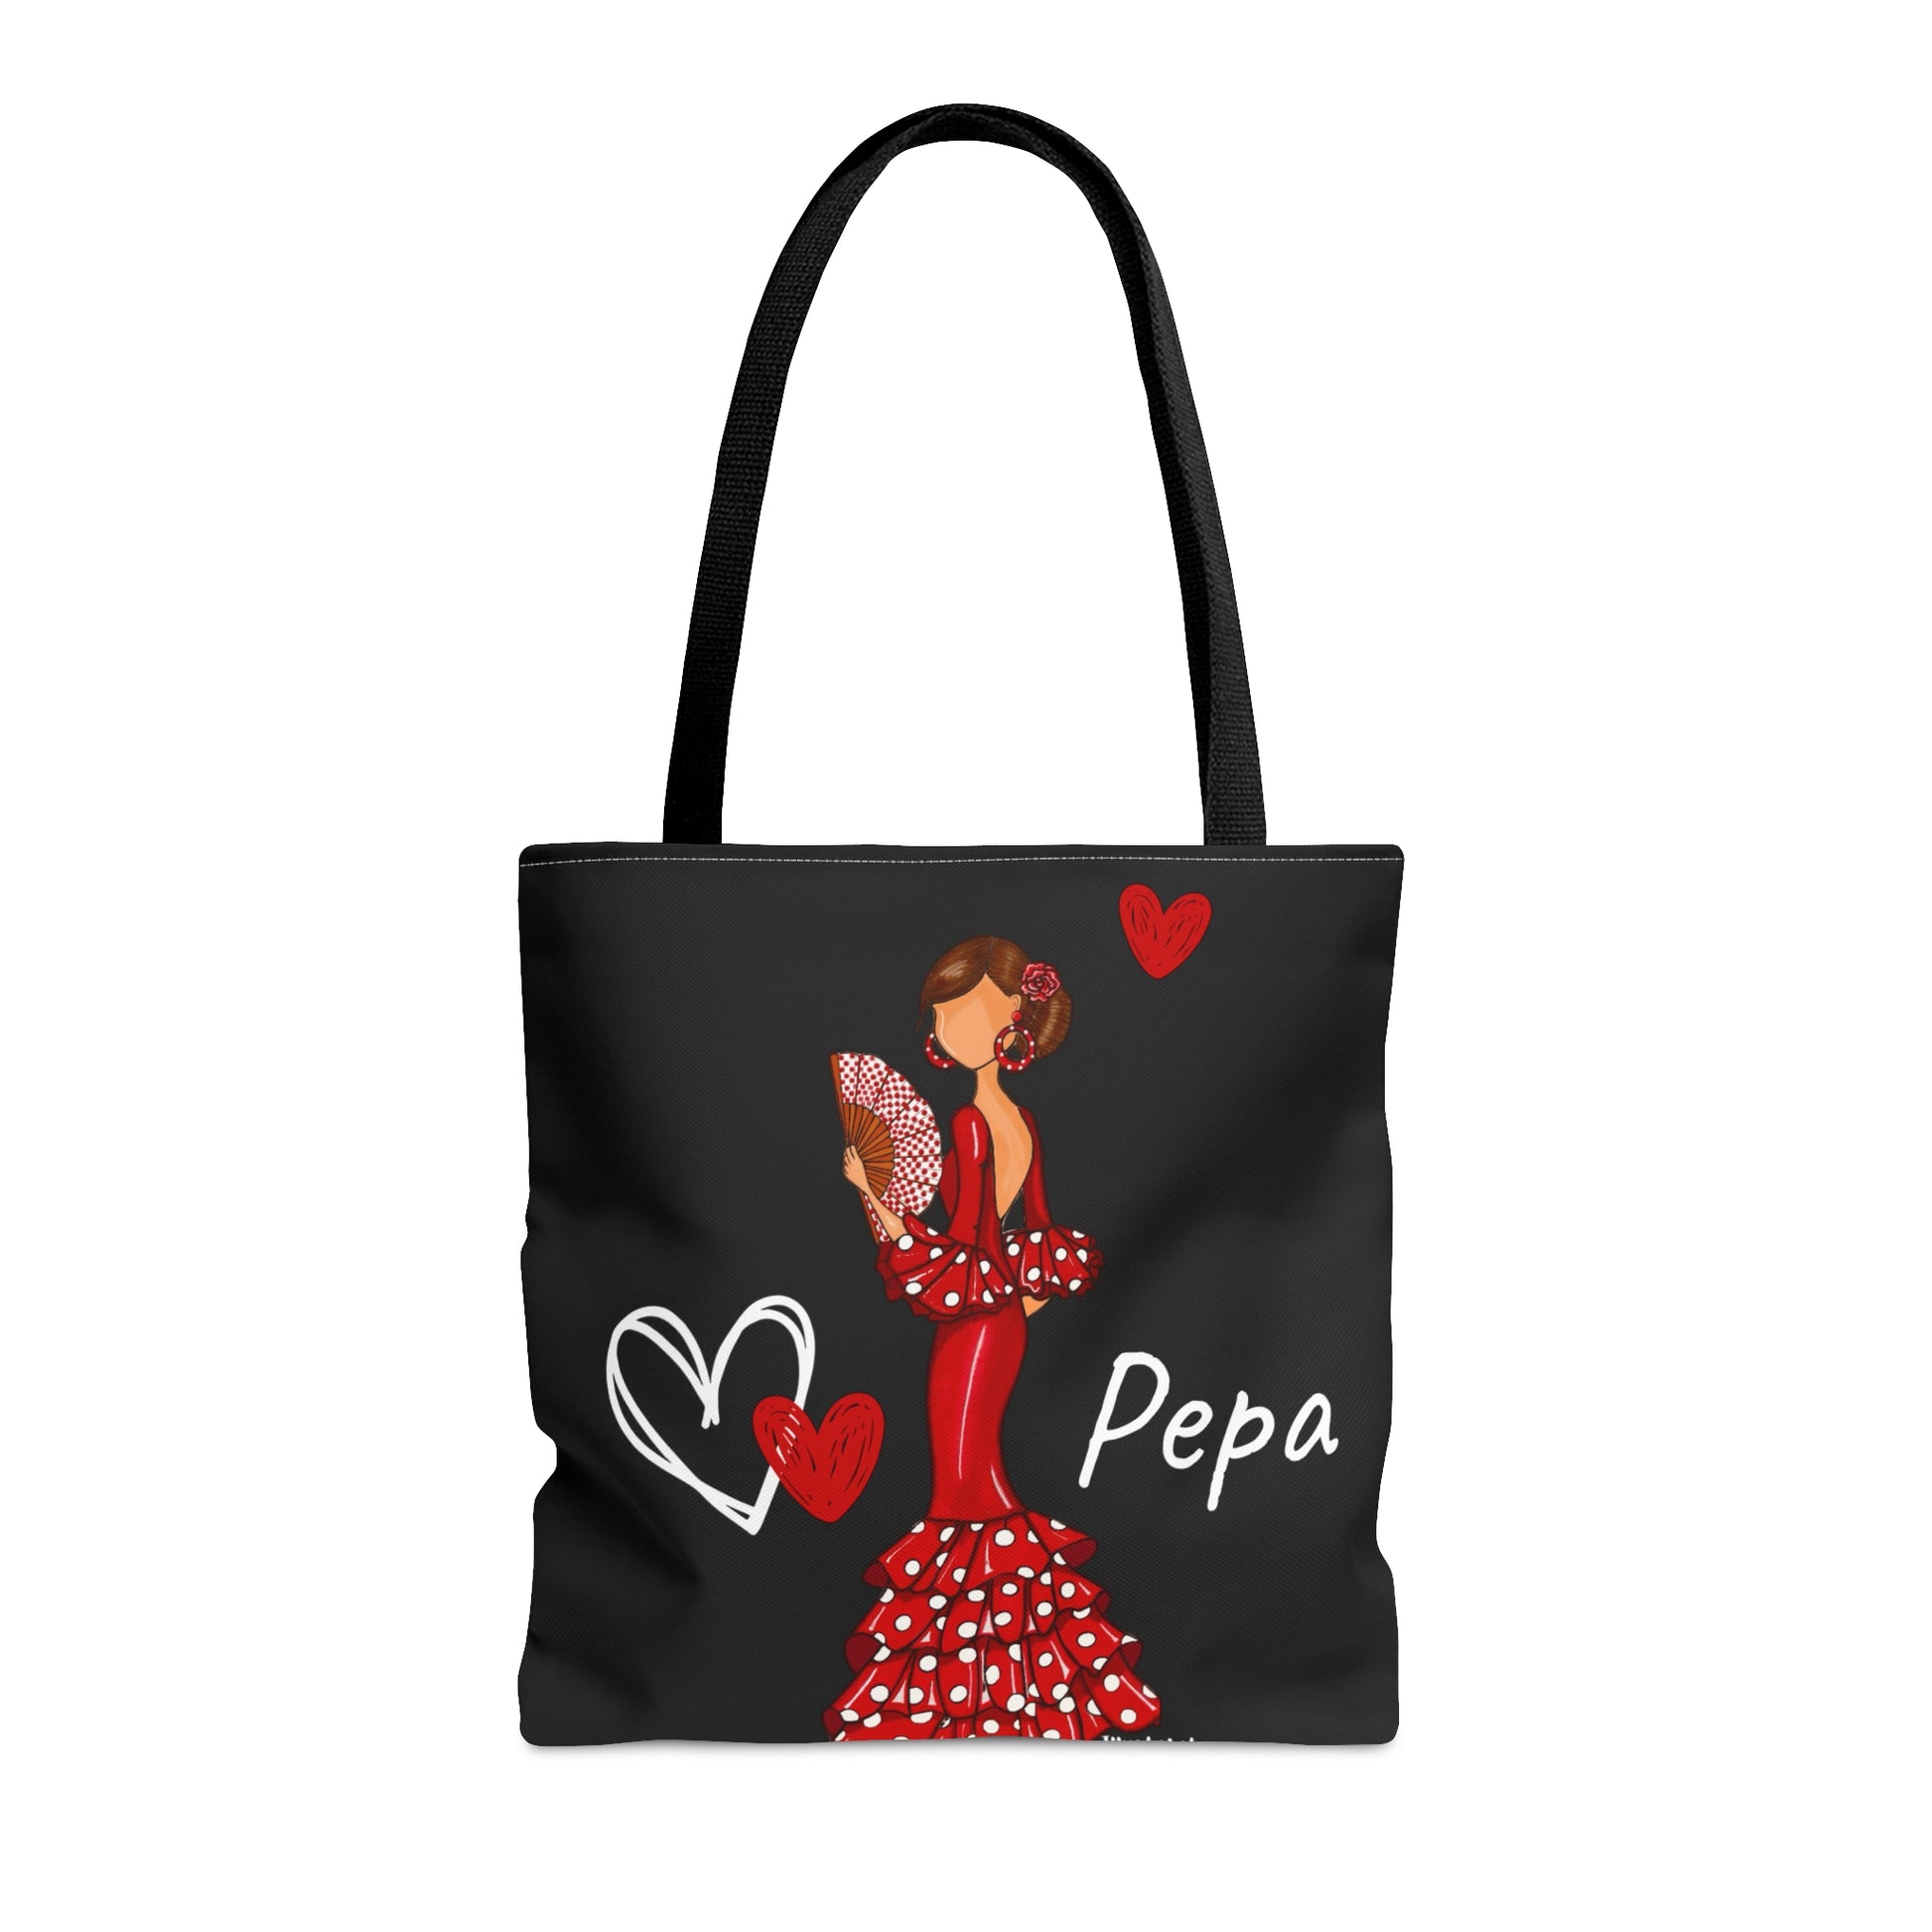 a black tote bag with a woman in a red dress holding a fan